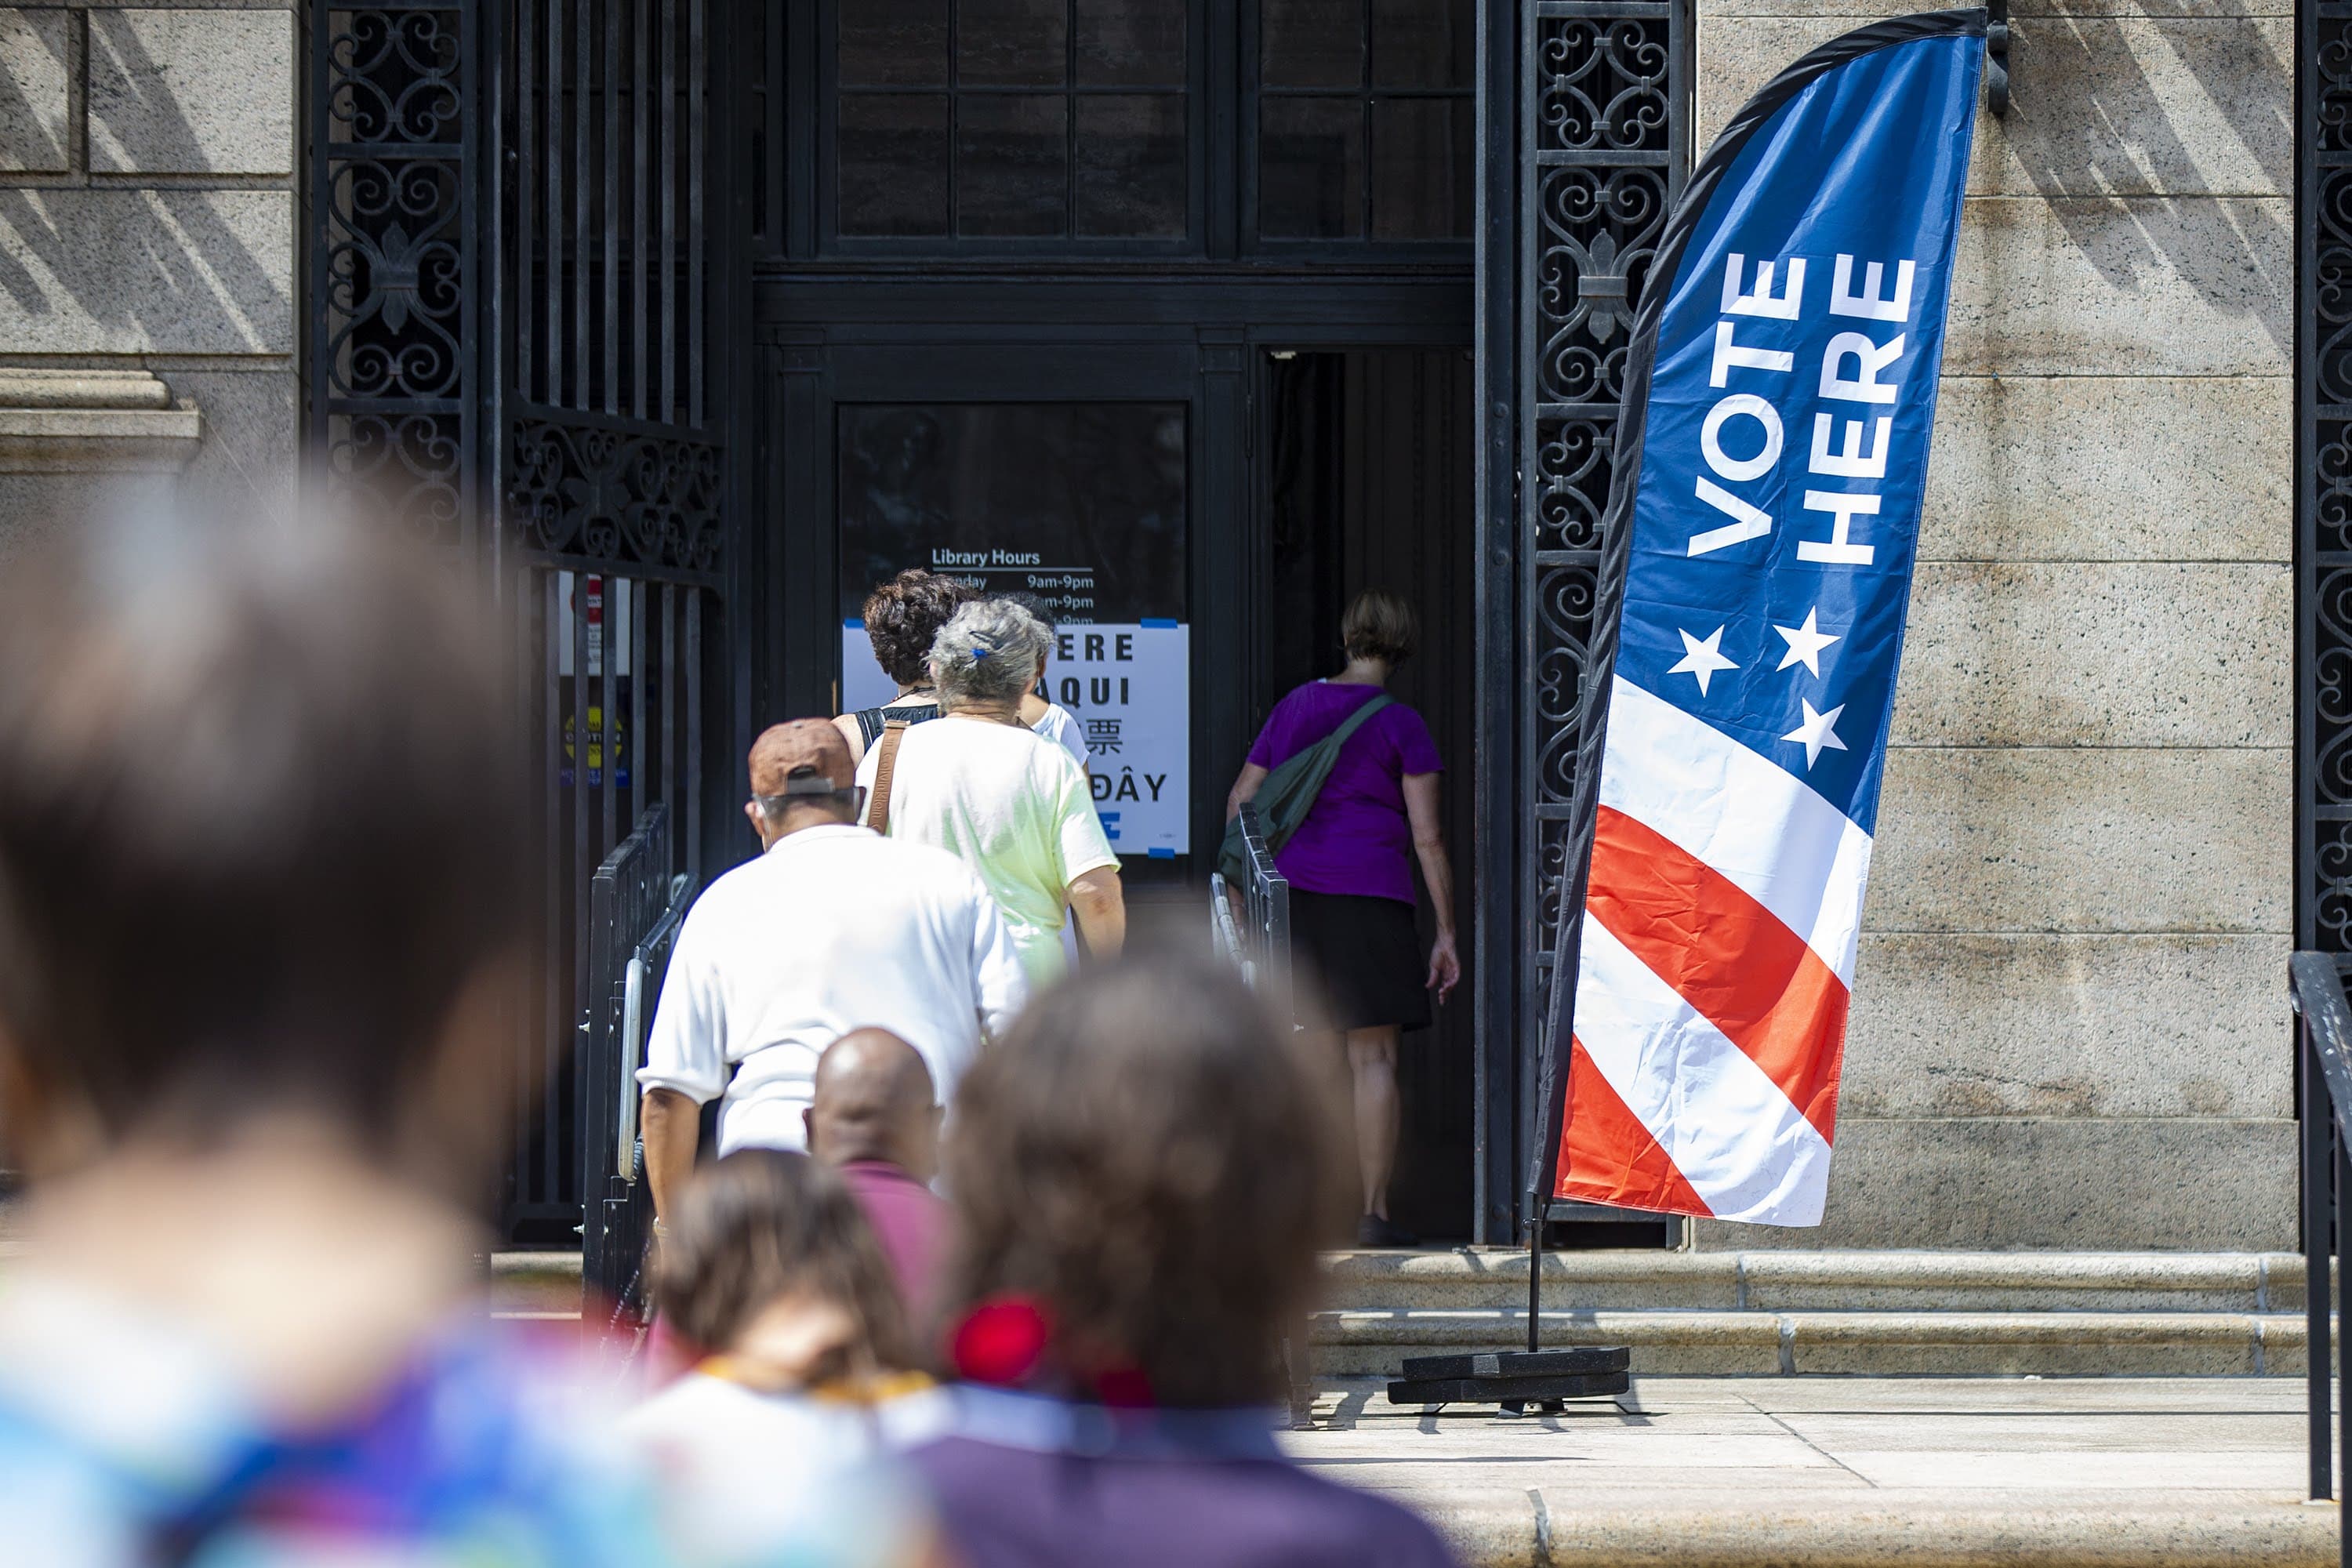 Voters stand in line six feet apart outside the Boston Public Library on the first day of early voting, Aug. 22, for the Massachusetts primary. (Jesse Costa/WBUR)